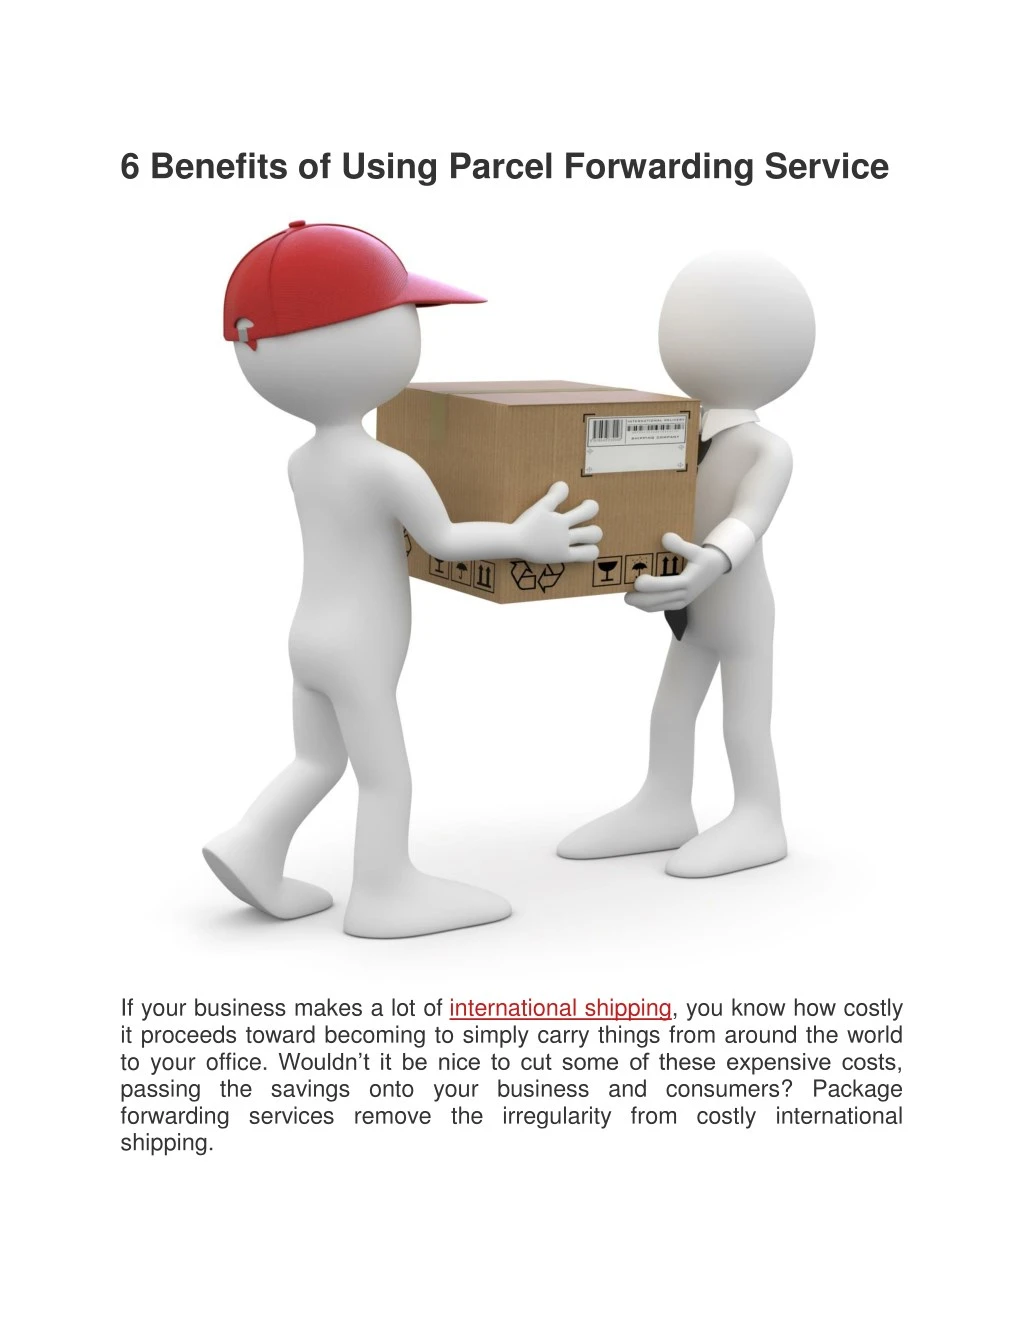 6 benefits of using parcel forwarding service